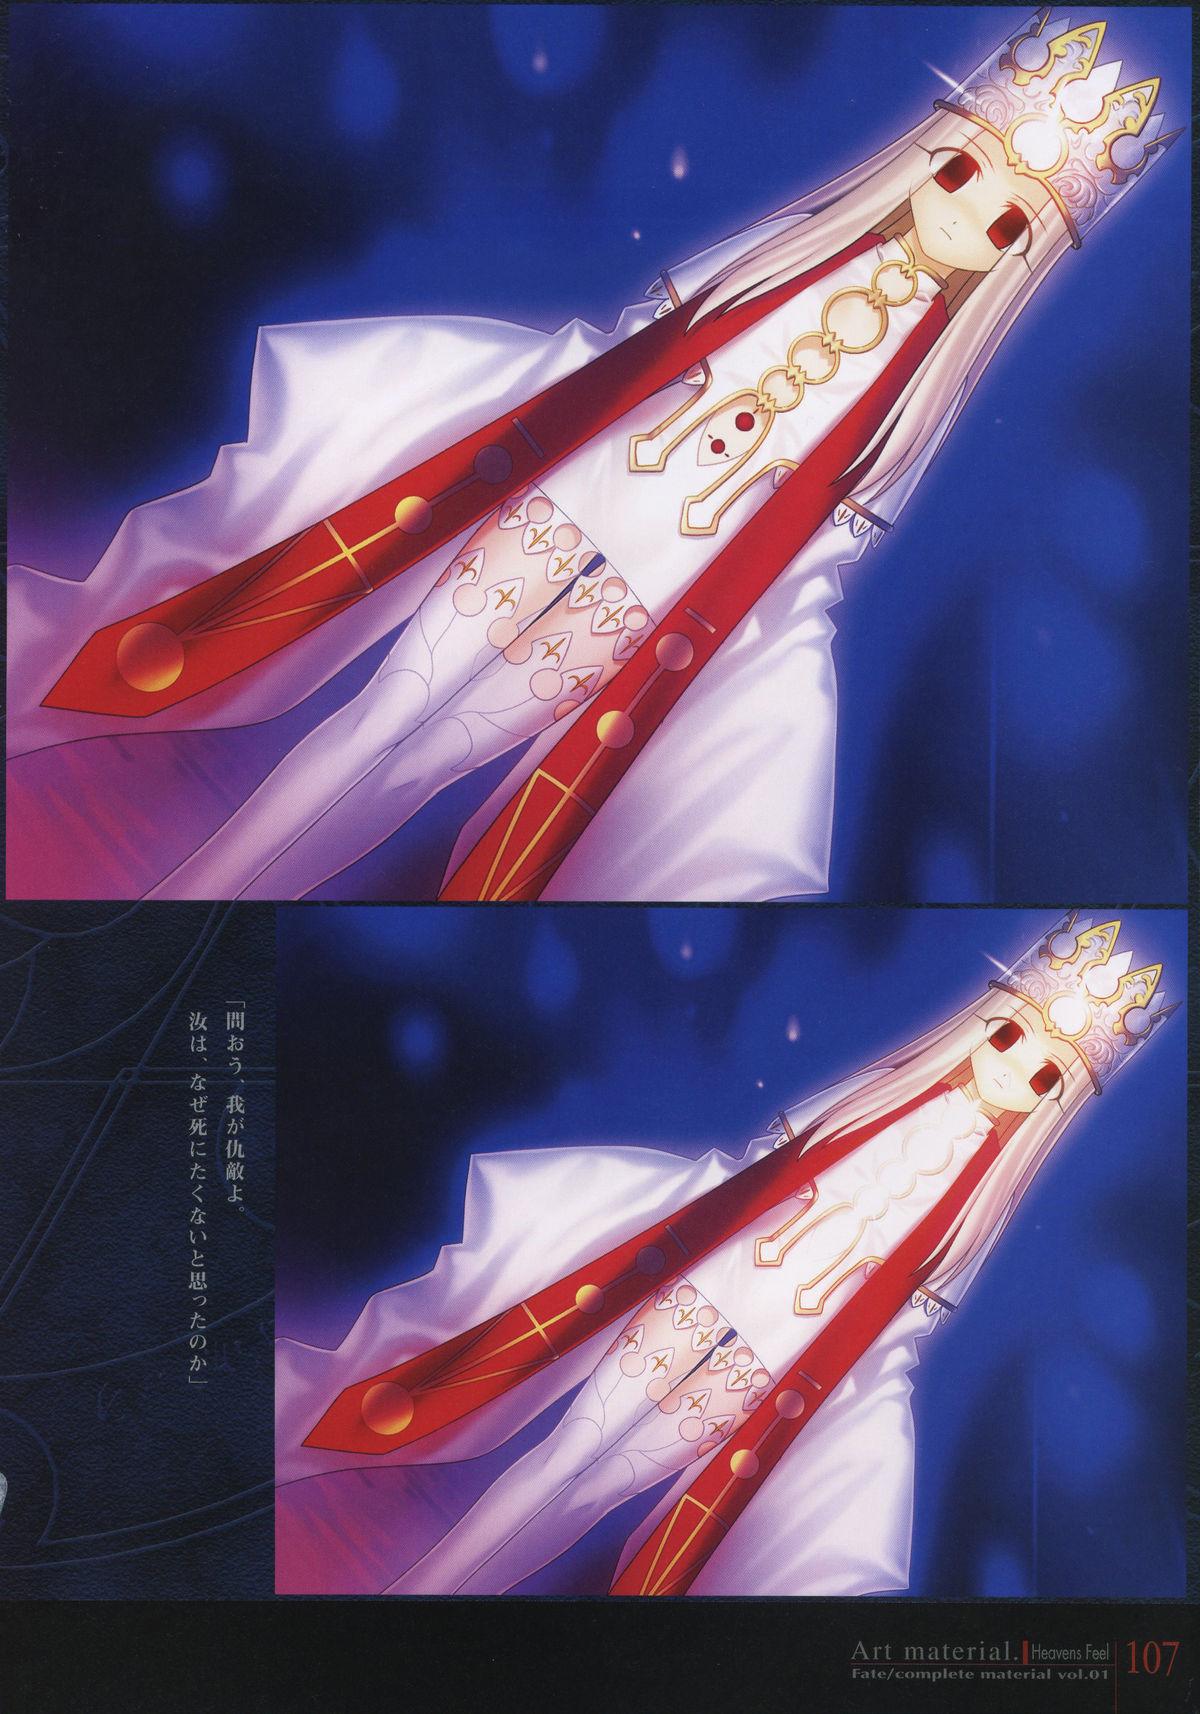 Fate/complete material I - Art material. 111